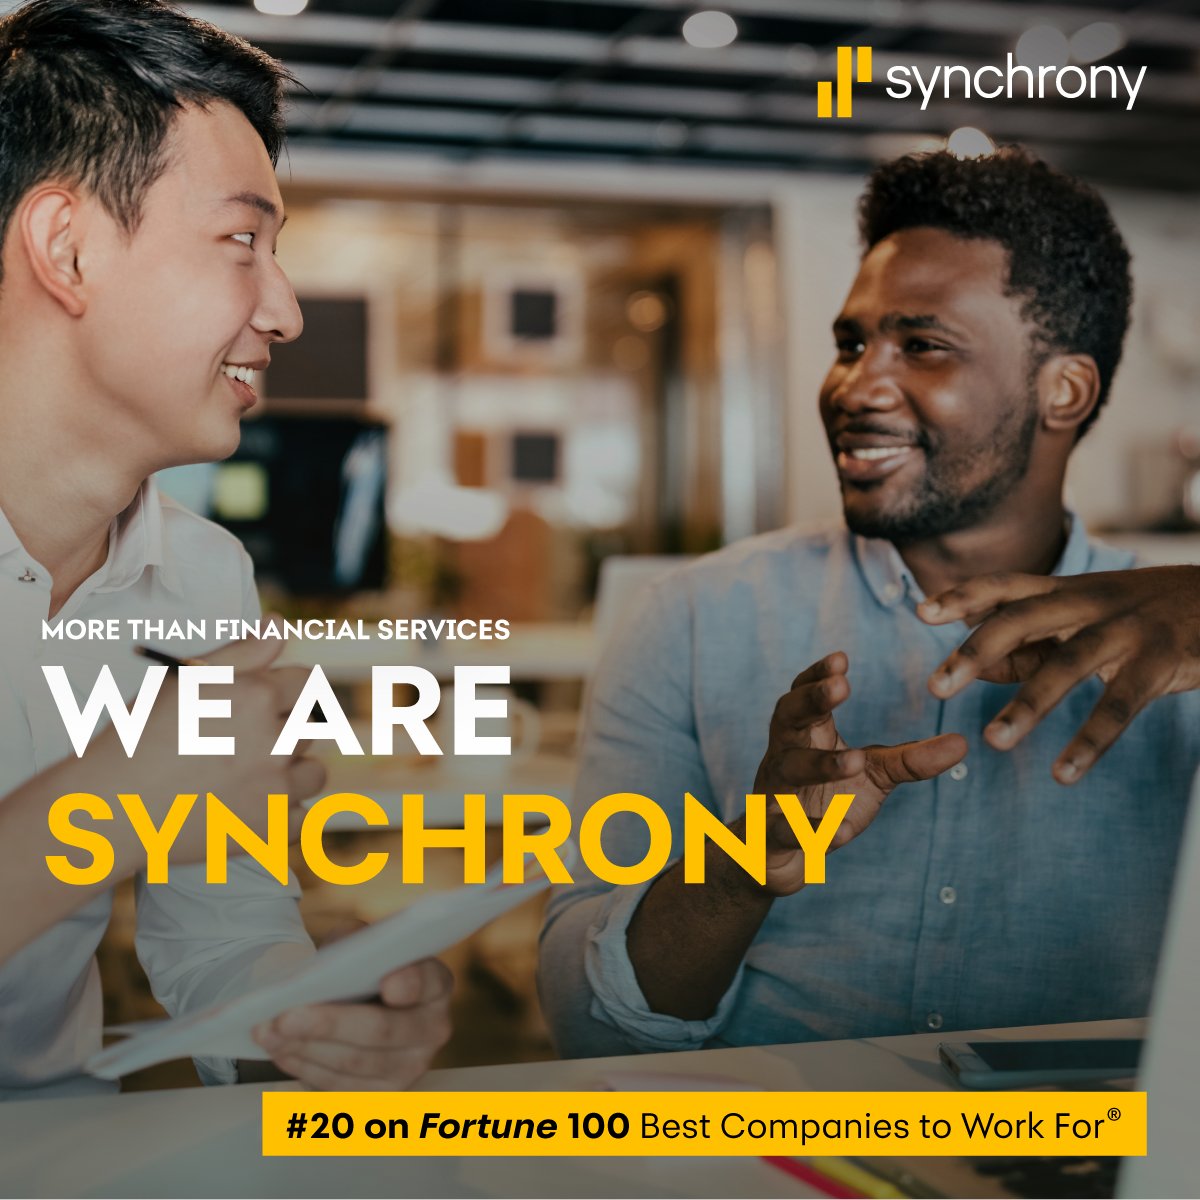 Thank you to our entire team for making Synchrony a Top 20 Best Company to Work For! We are honored to be recognized by @FortuneMagazine and @GPTW_US. Our people-first approach, culture of caring, and agile mindset drive innovation at speed and scale.